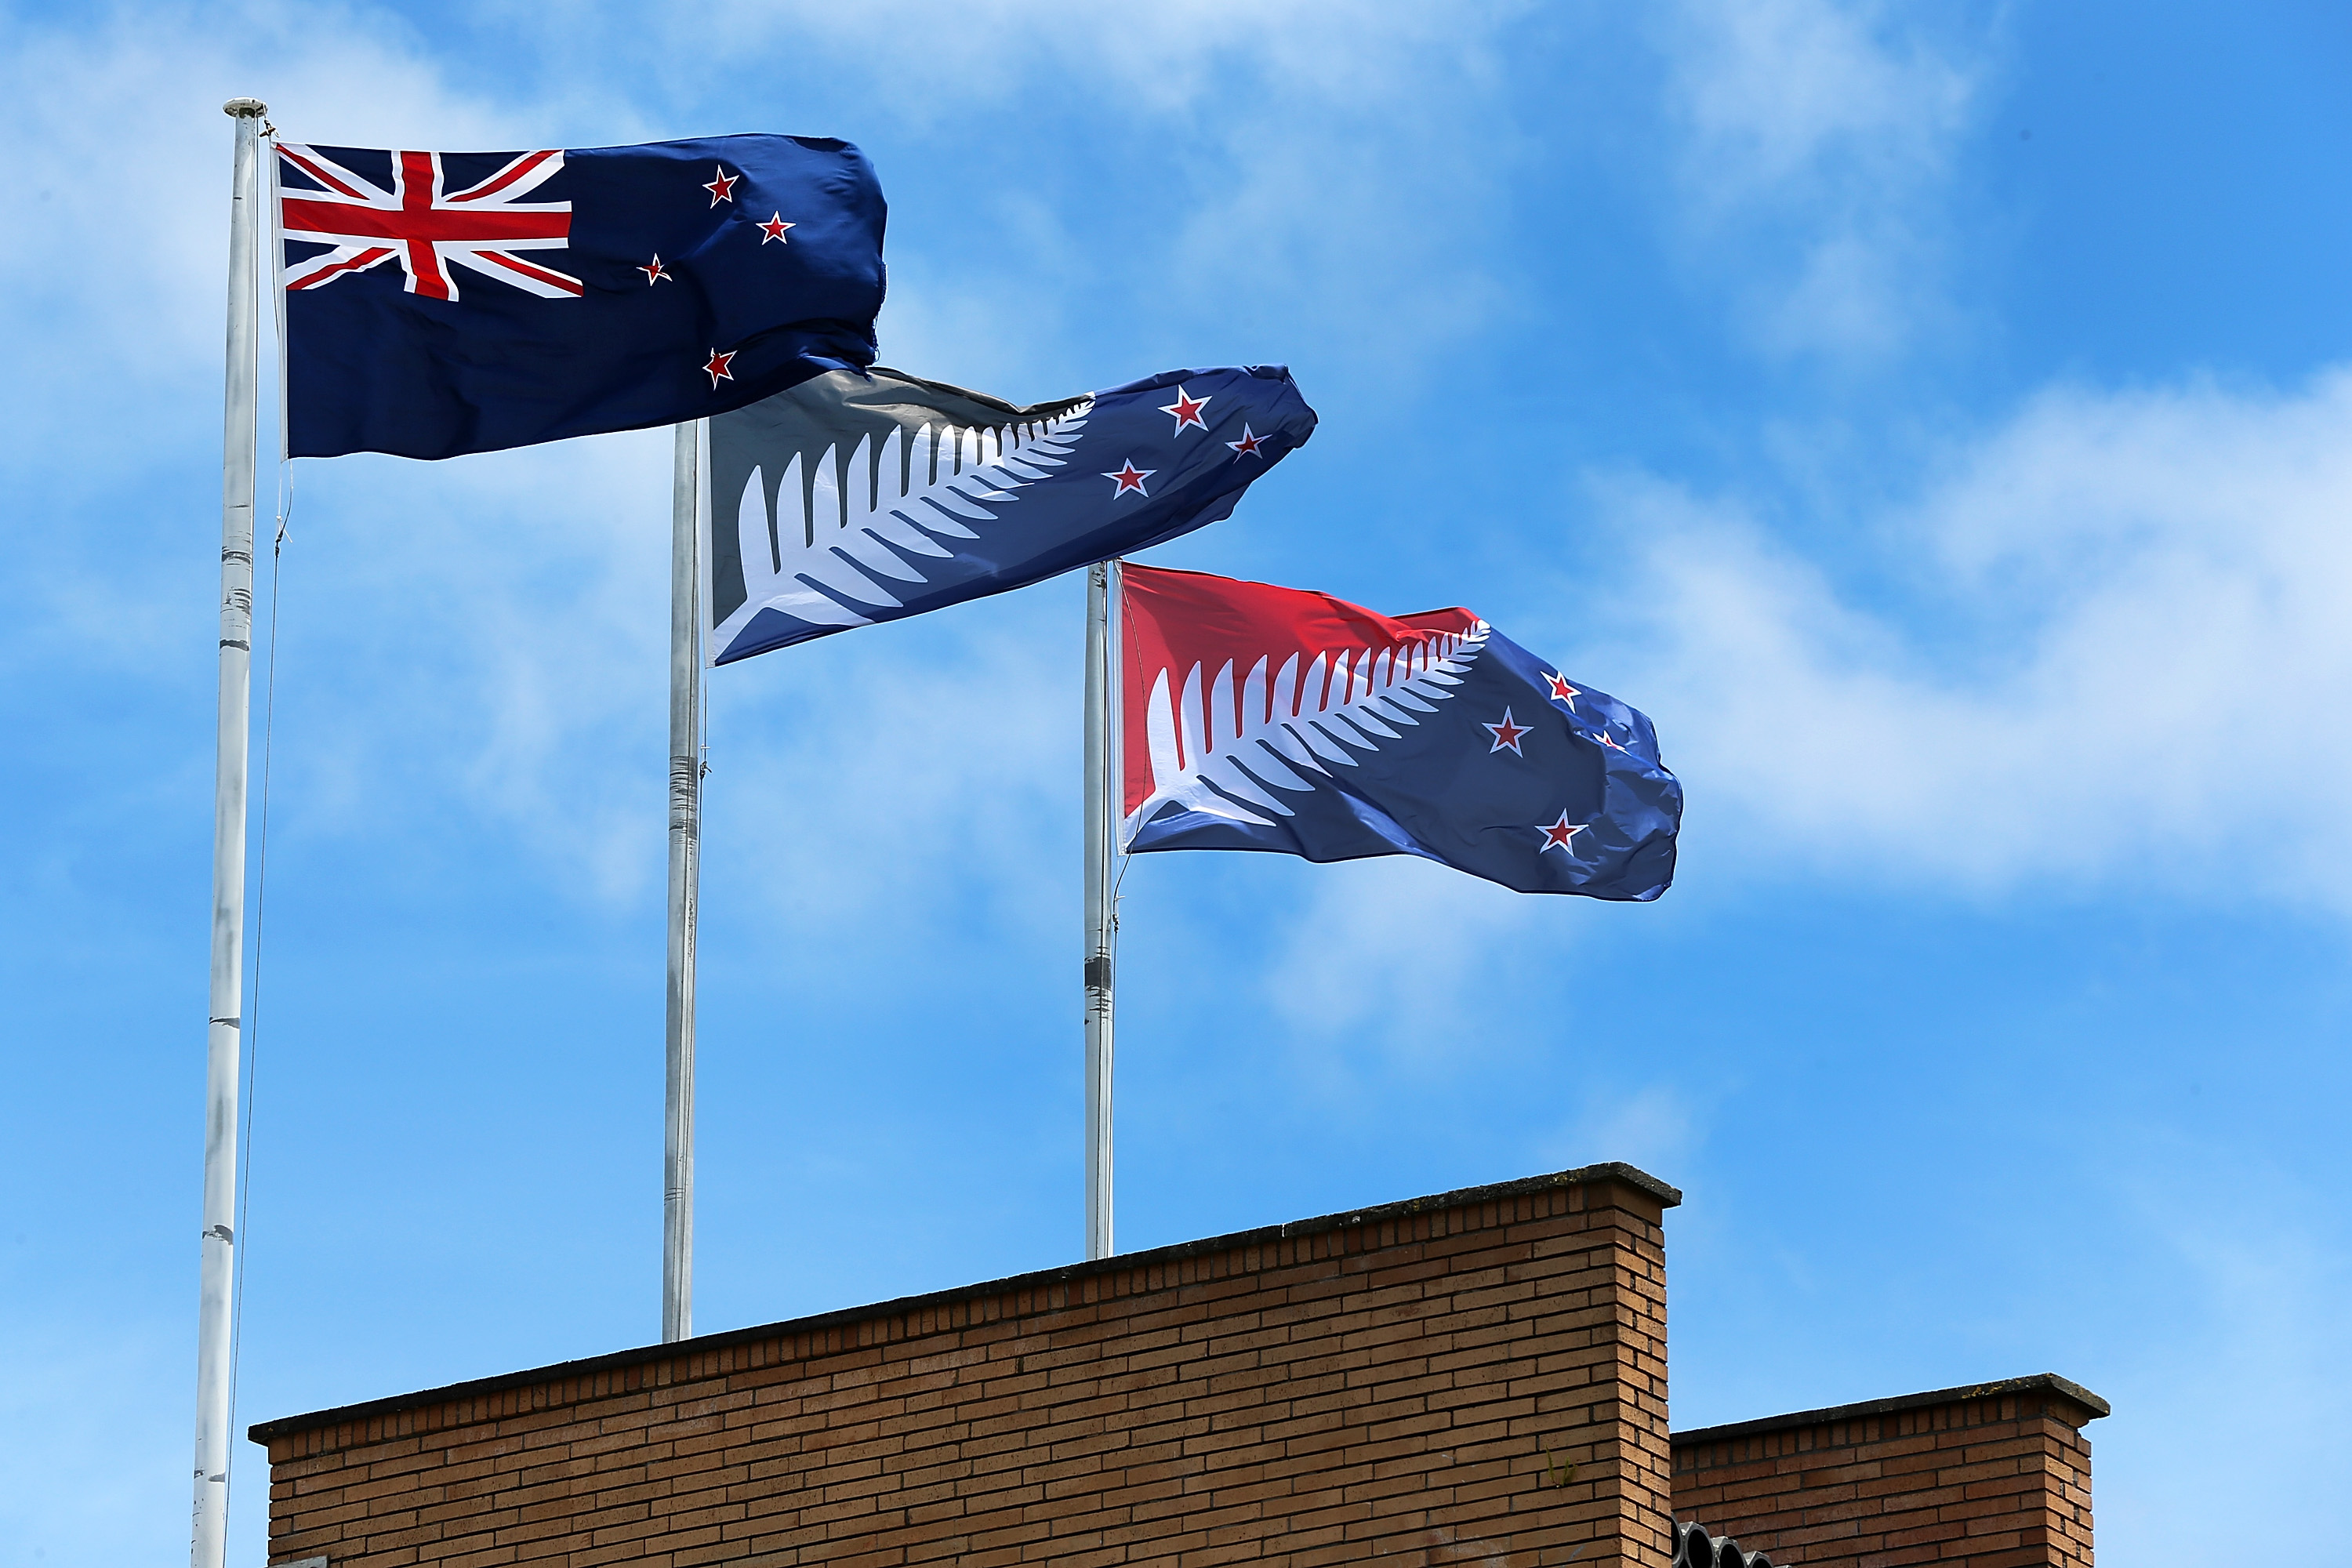 The current New Zealand flag (L), the referendum-winning blue-and-black Kyle Lockwood–designed flag (C), and the second-place red-and-blue flag (R) fly on a building in New Lynn, Auckland, on December 14, 2015, in Auckland, New Zealand.